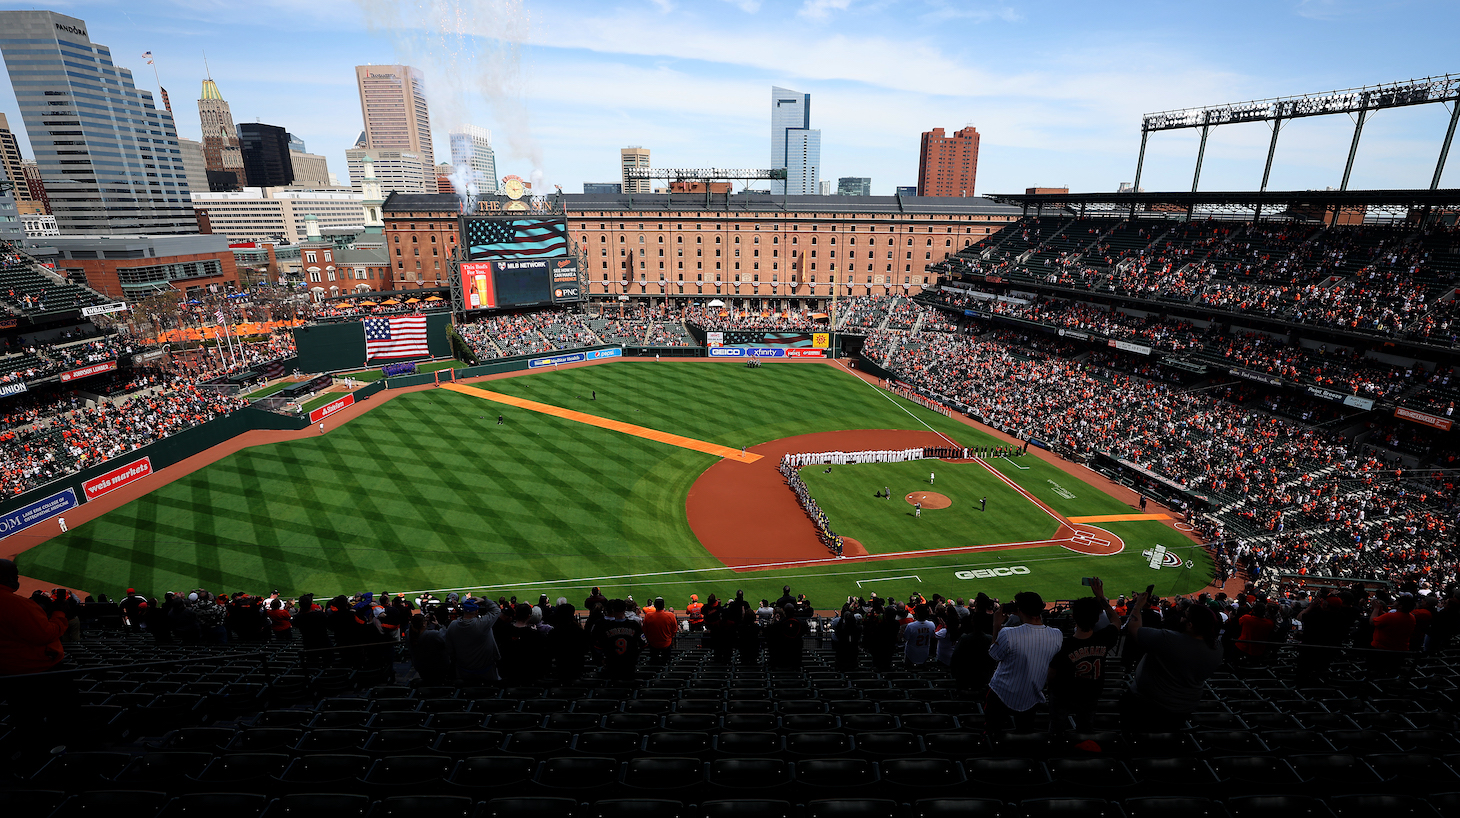 BALTIMORE, MARYLAND - APRIL 11: Members of the Milwaukee Brewers and Baltimore Orioles listen to the national anthem before the start of Opening Day at Oriole Park at Camden Yards on April 11, 2022 in Baltimore, Maryland. (Photo by Rob Carr/Getty Images)